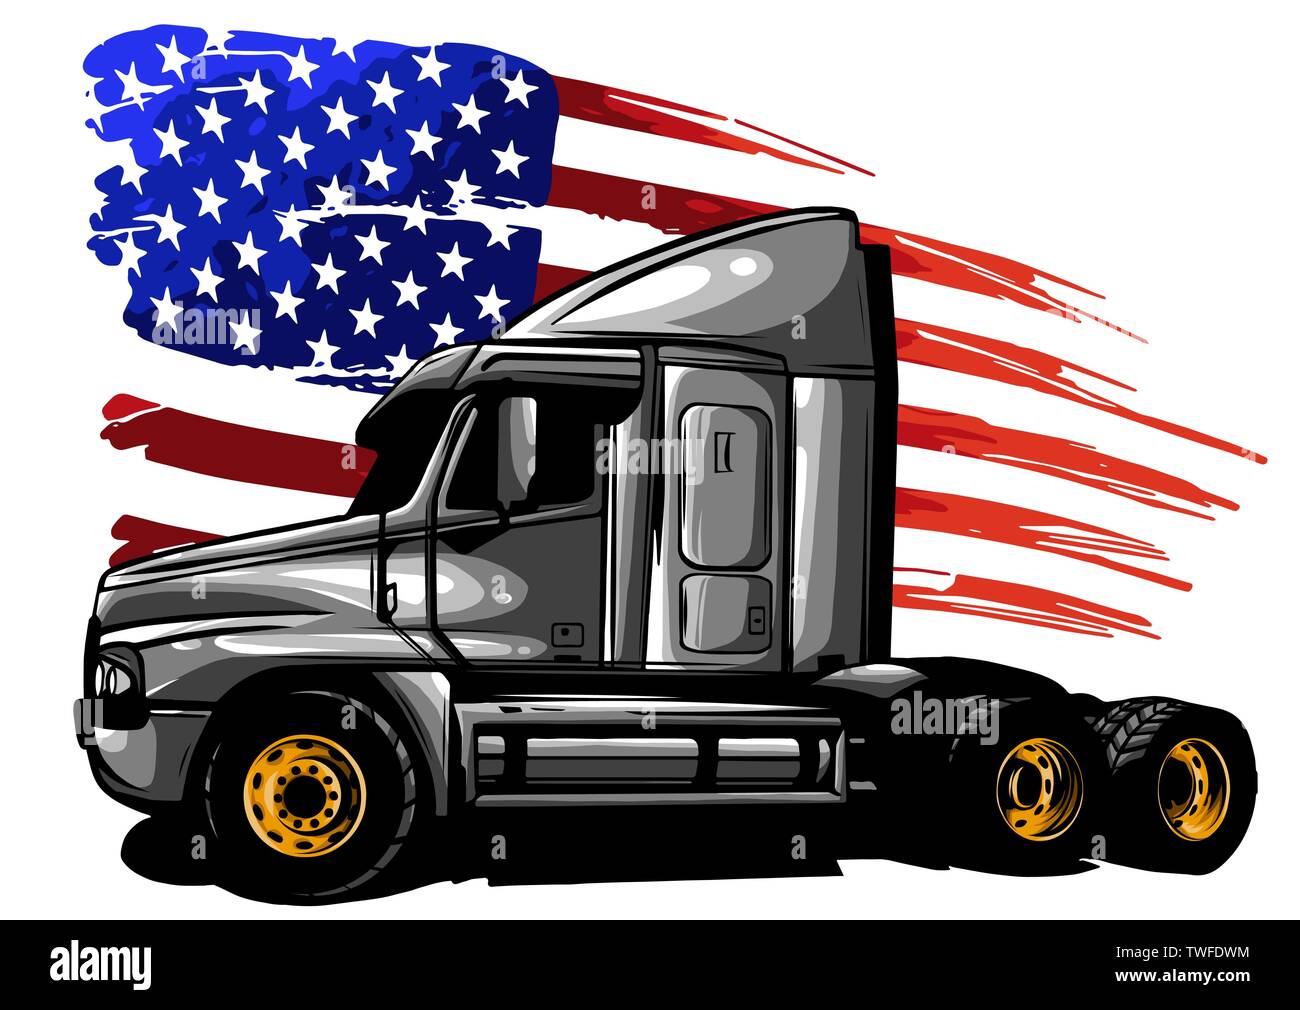 vector graphic design illustration of an American truck with stars and stripes flag Stock Vector